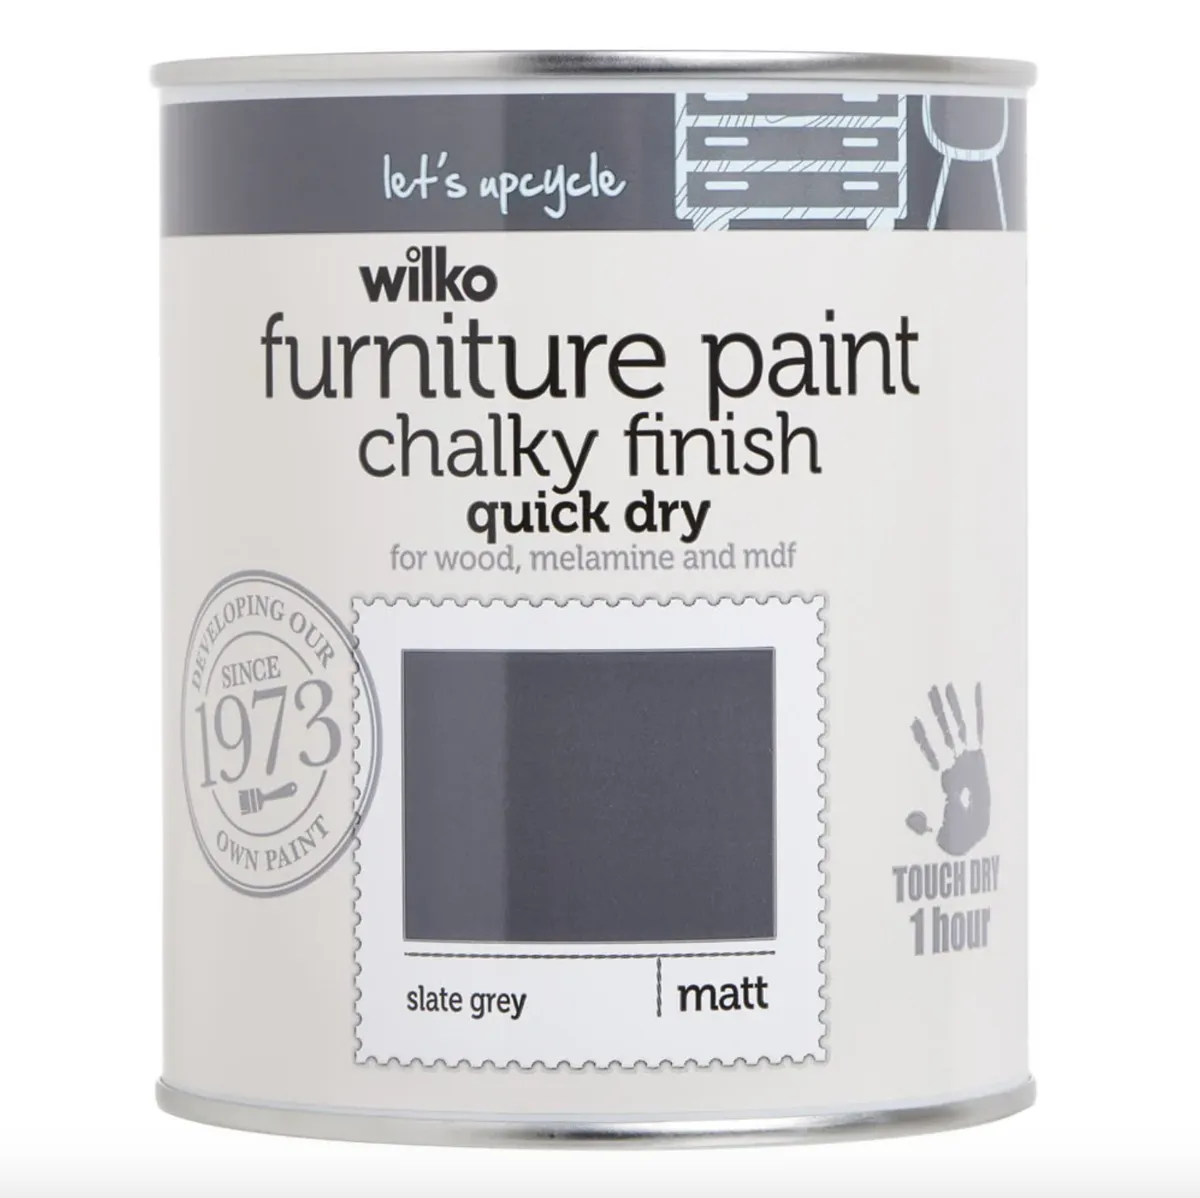 Wilko's Quick Dry Chalky Furniture Slate Grey Paint